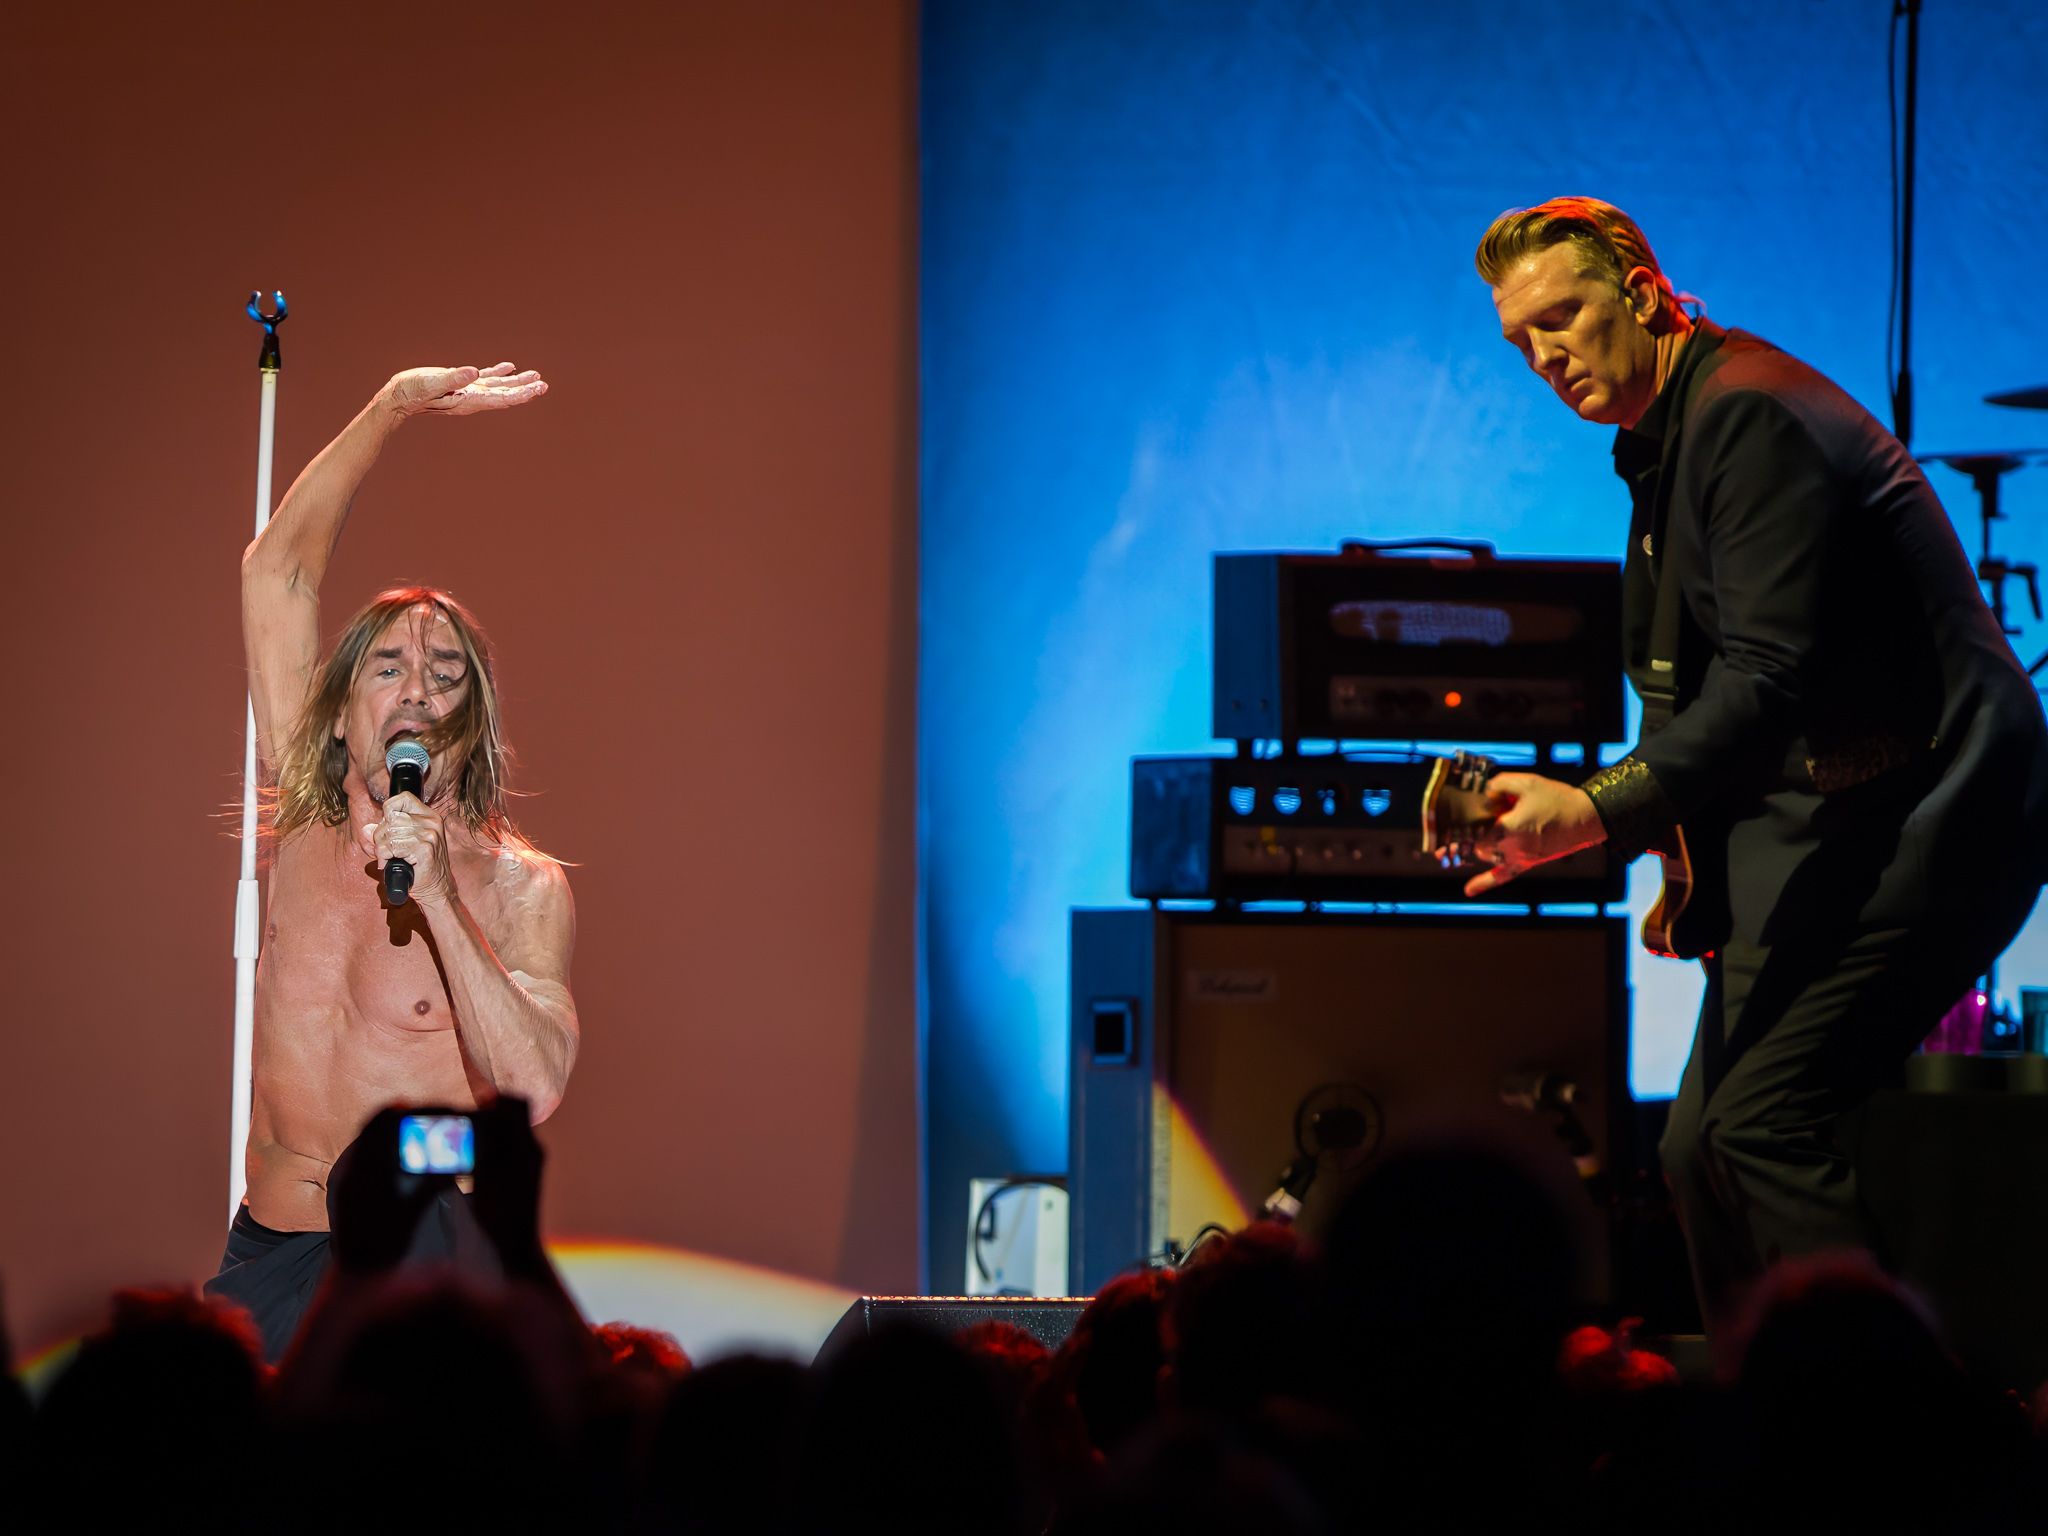 Iggy Pop &Josh Homme by Bullet-ray Photography